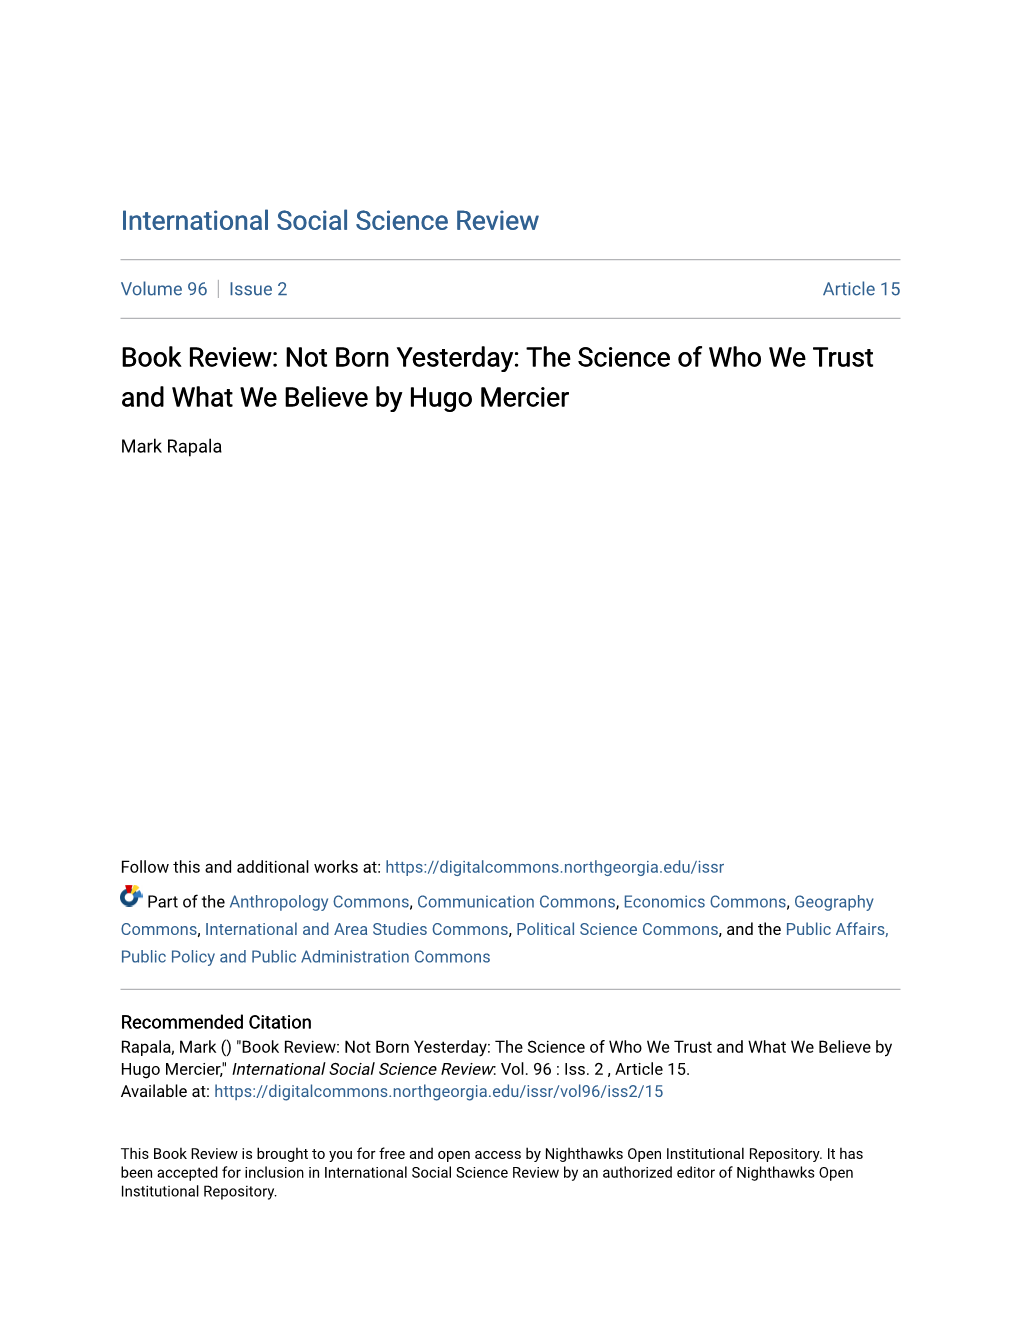 Not Born Yesterday: the Science of Who We Trust and What We Believe by Hugo Mercier